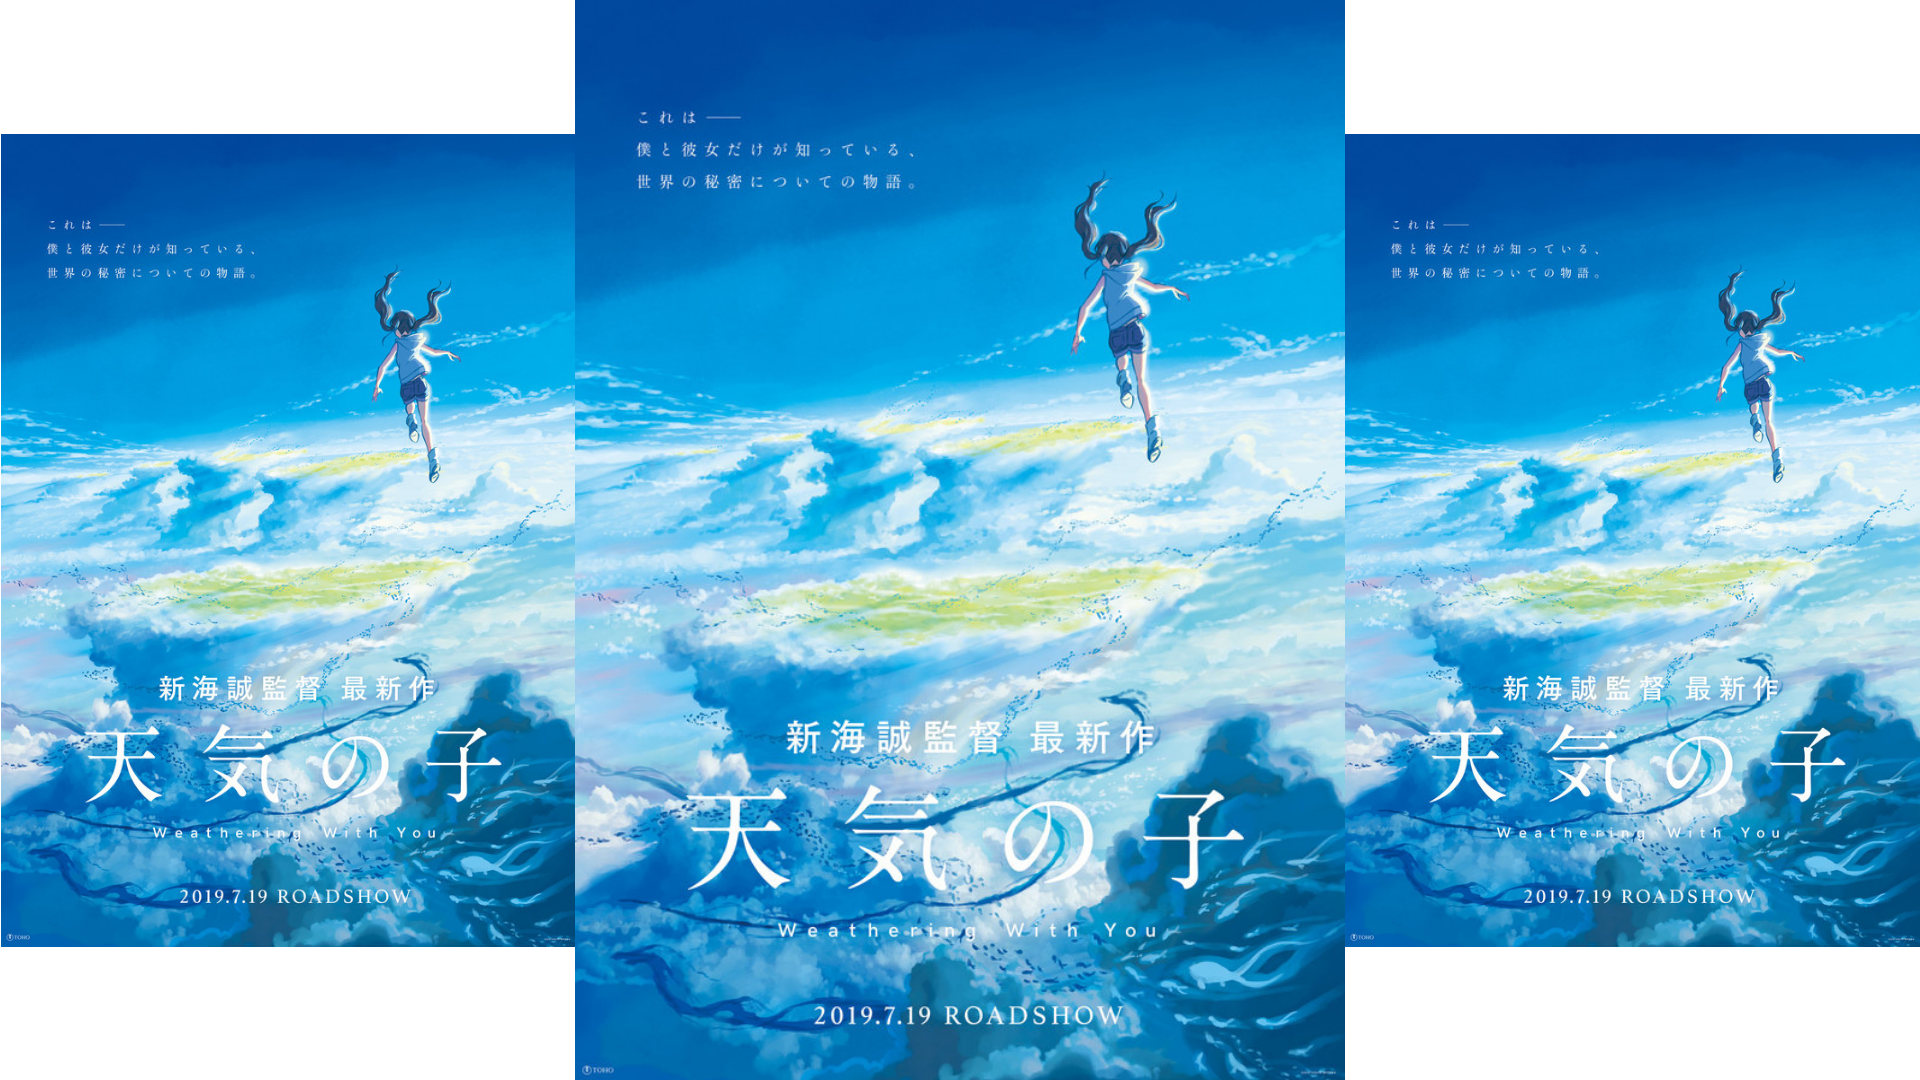 The Movie Free FS Part 2 has been screened for 11 weeks since the  release Box office grosses exceeded 910 million yen The 4D version in  which you can feel the splashing